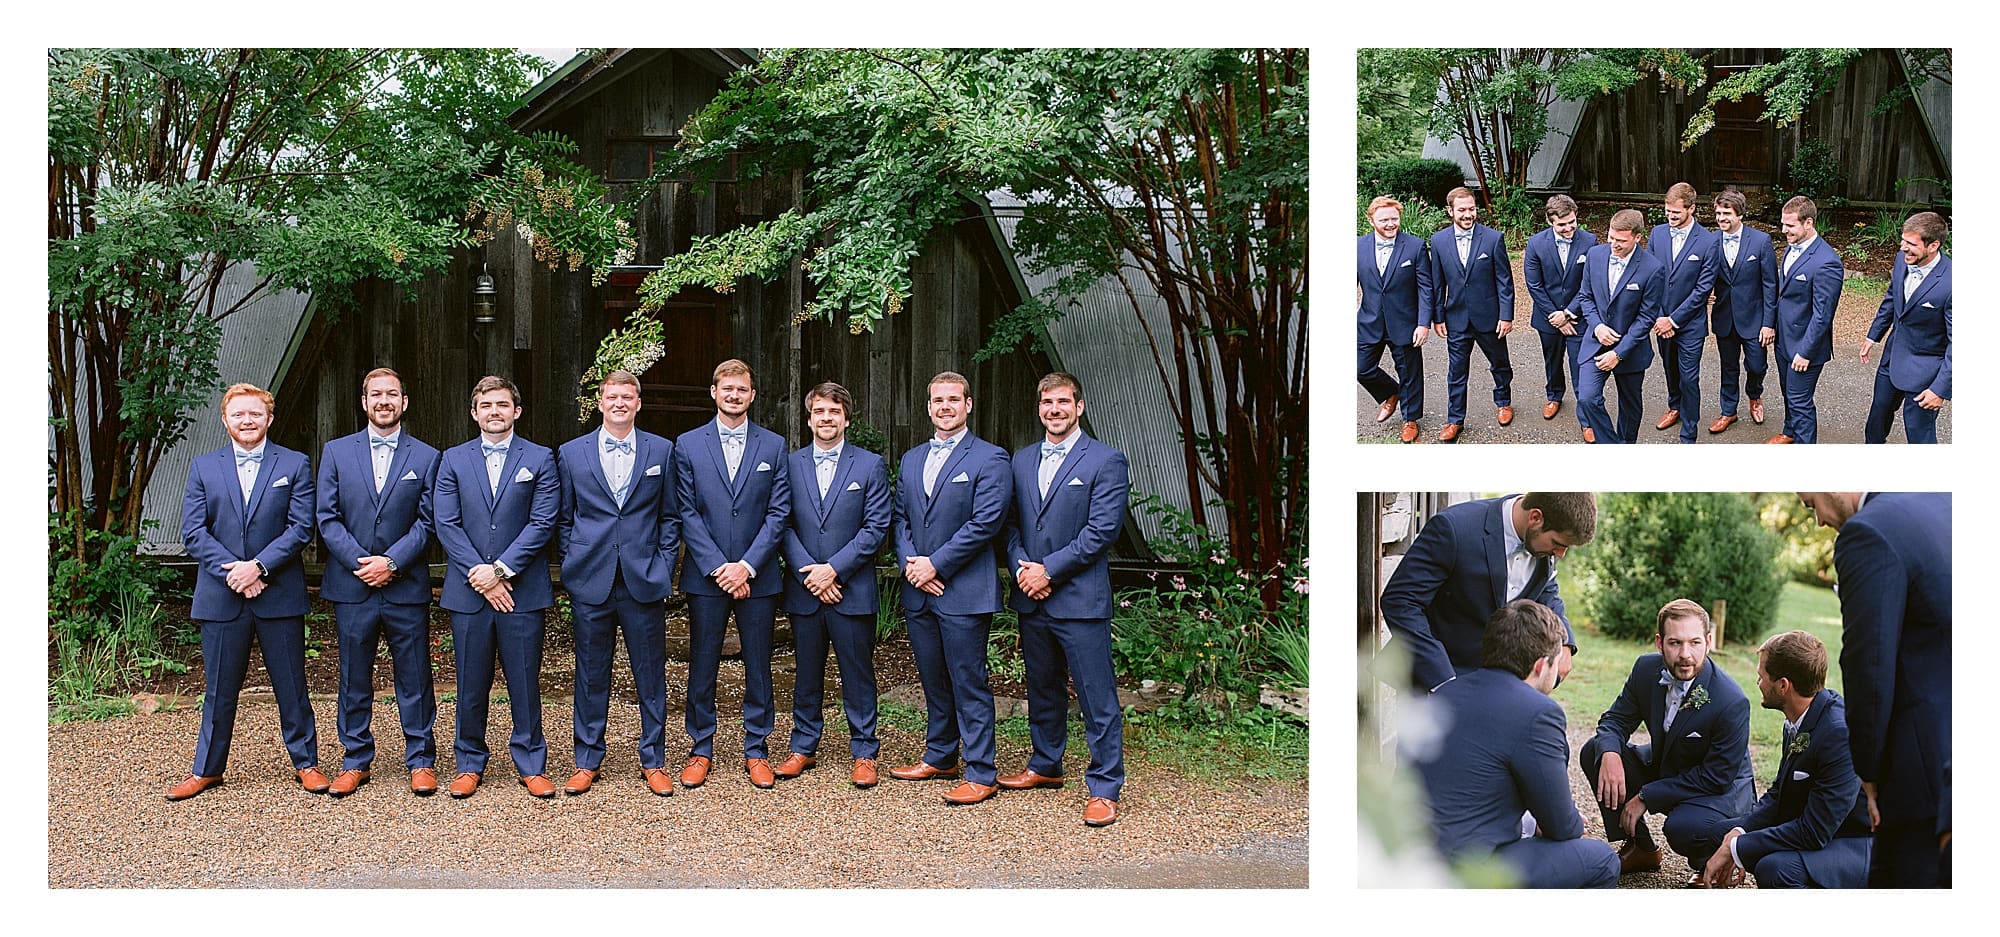 Groomsmen wearing blue suits standing in line smiling at camera